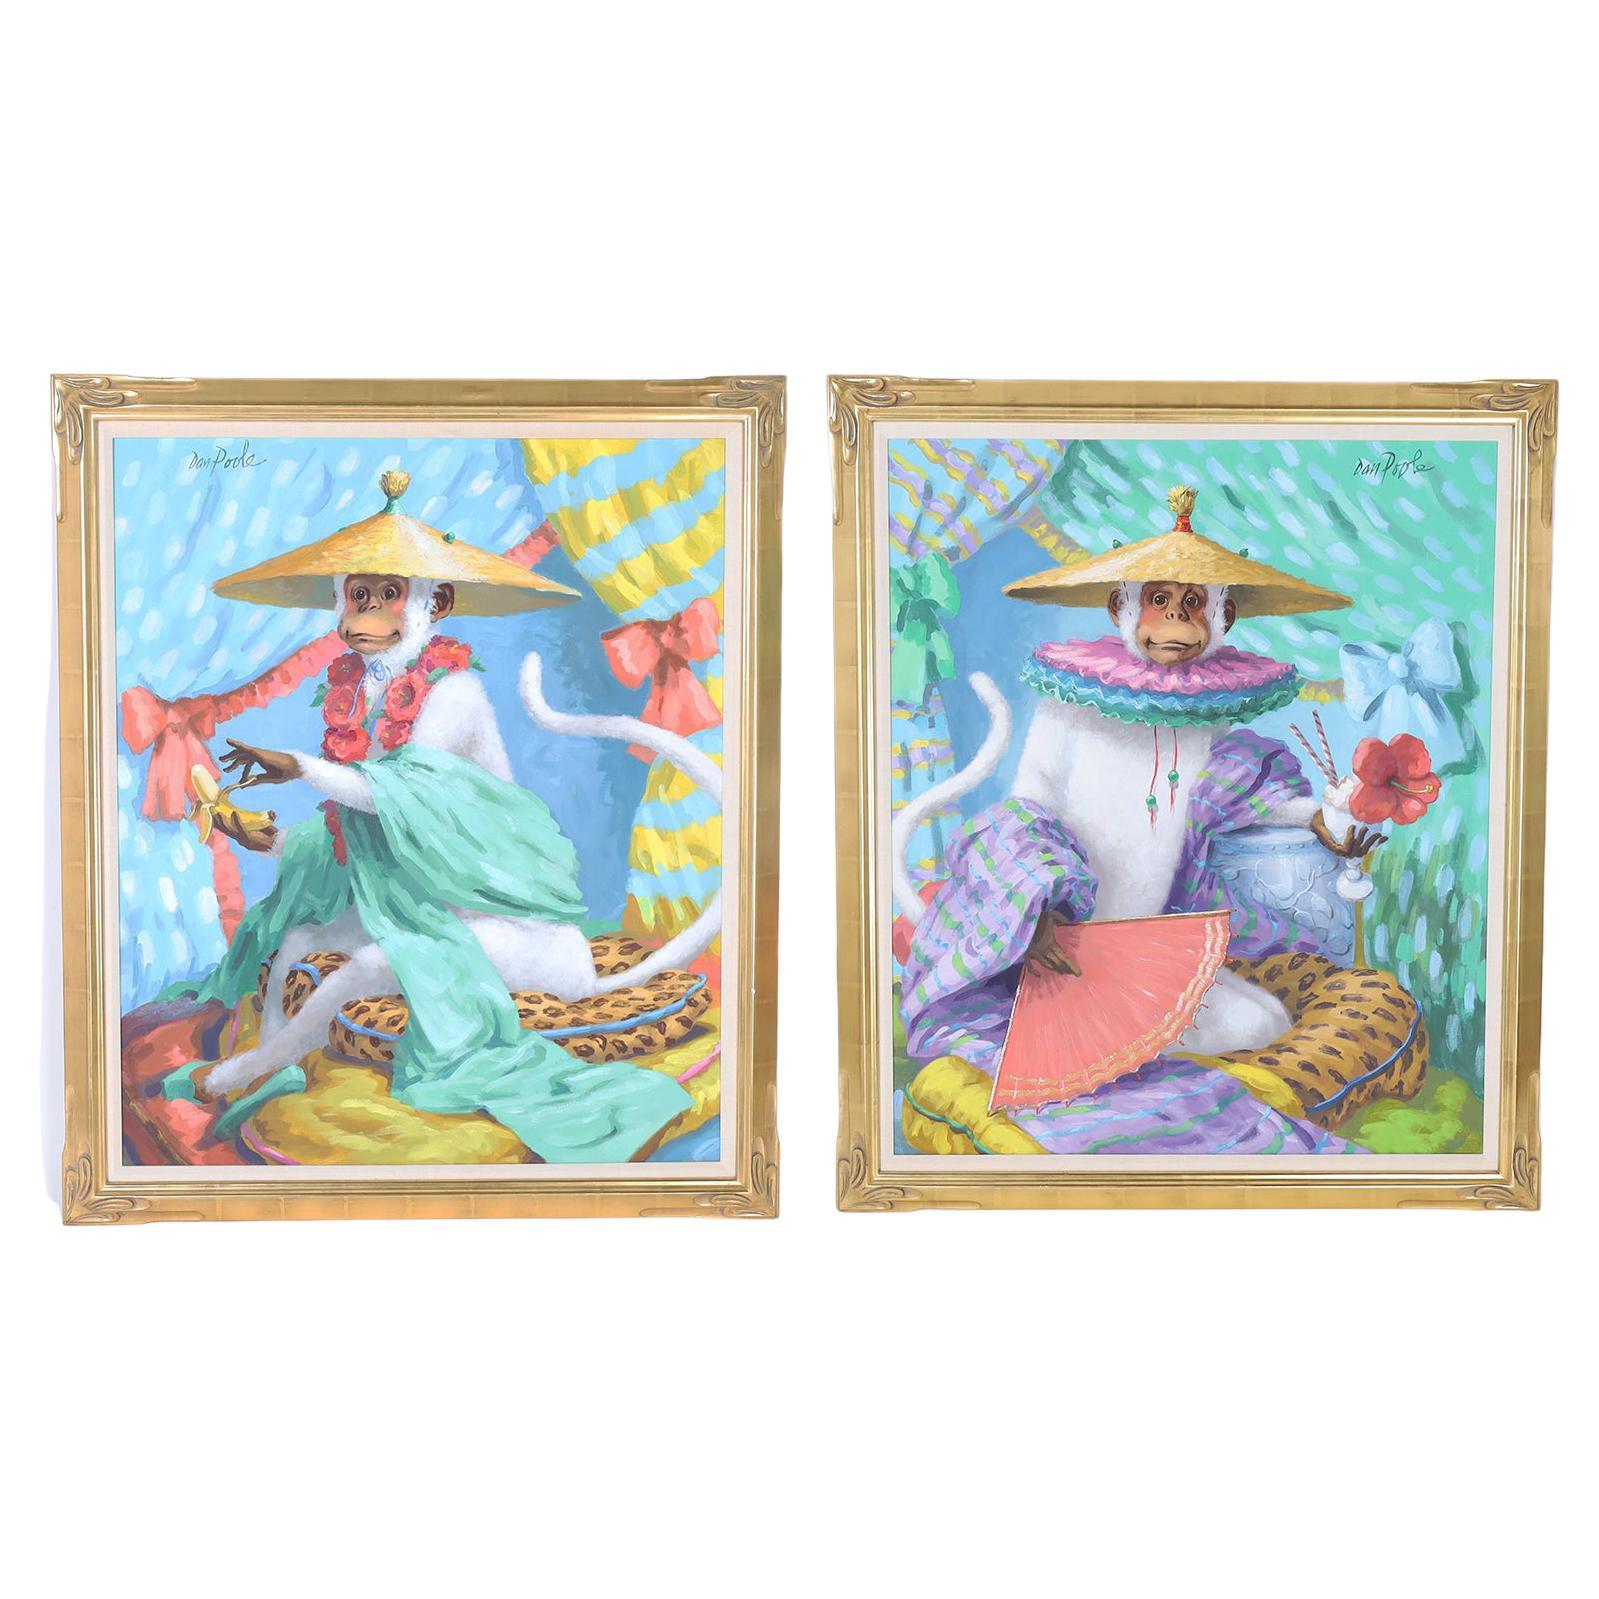 Pair of Fanciful Paintings on Canvas of Monkeys